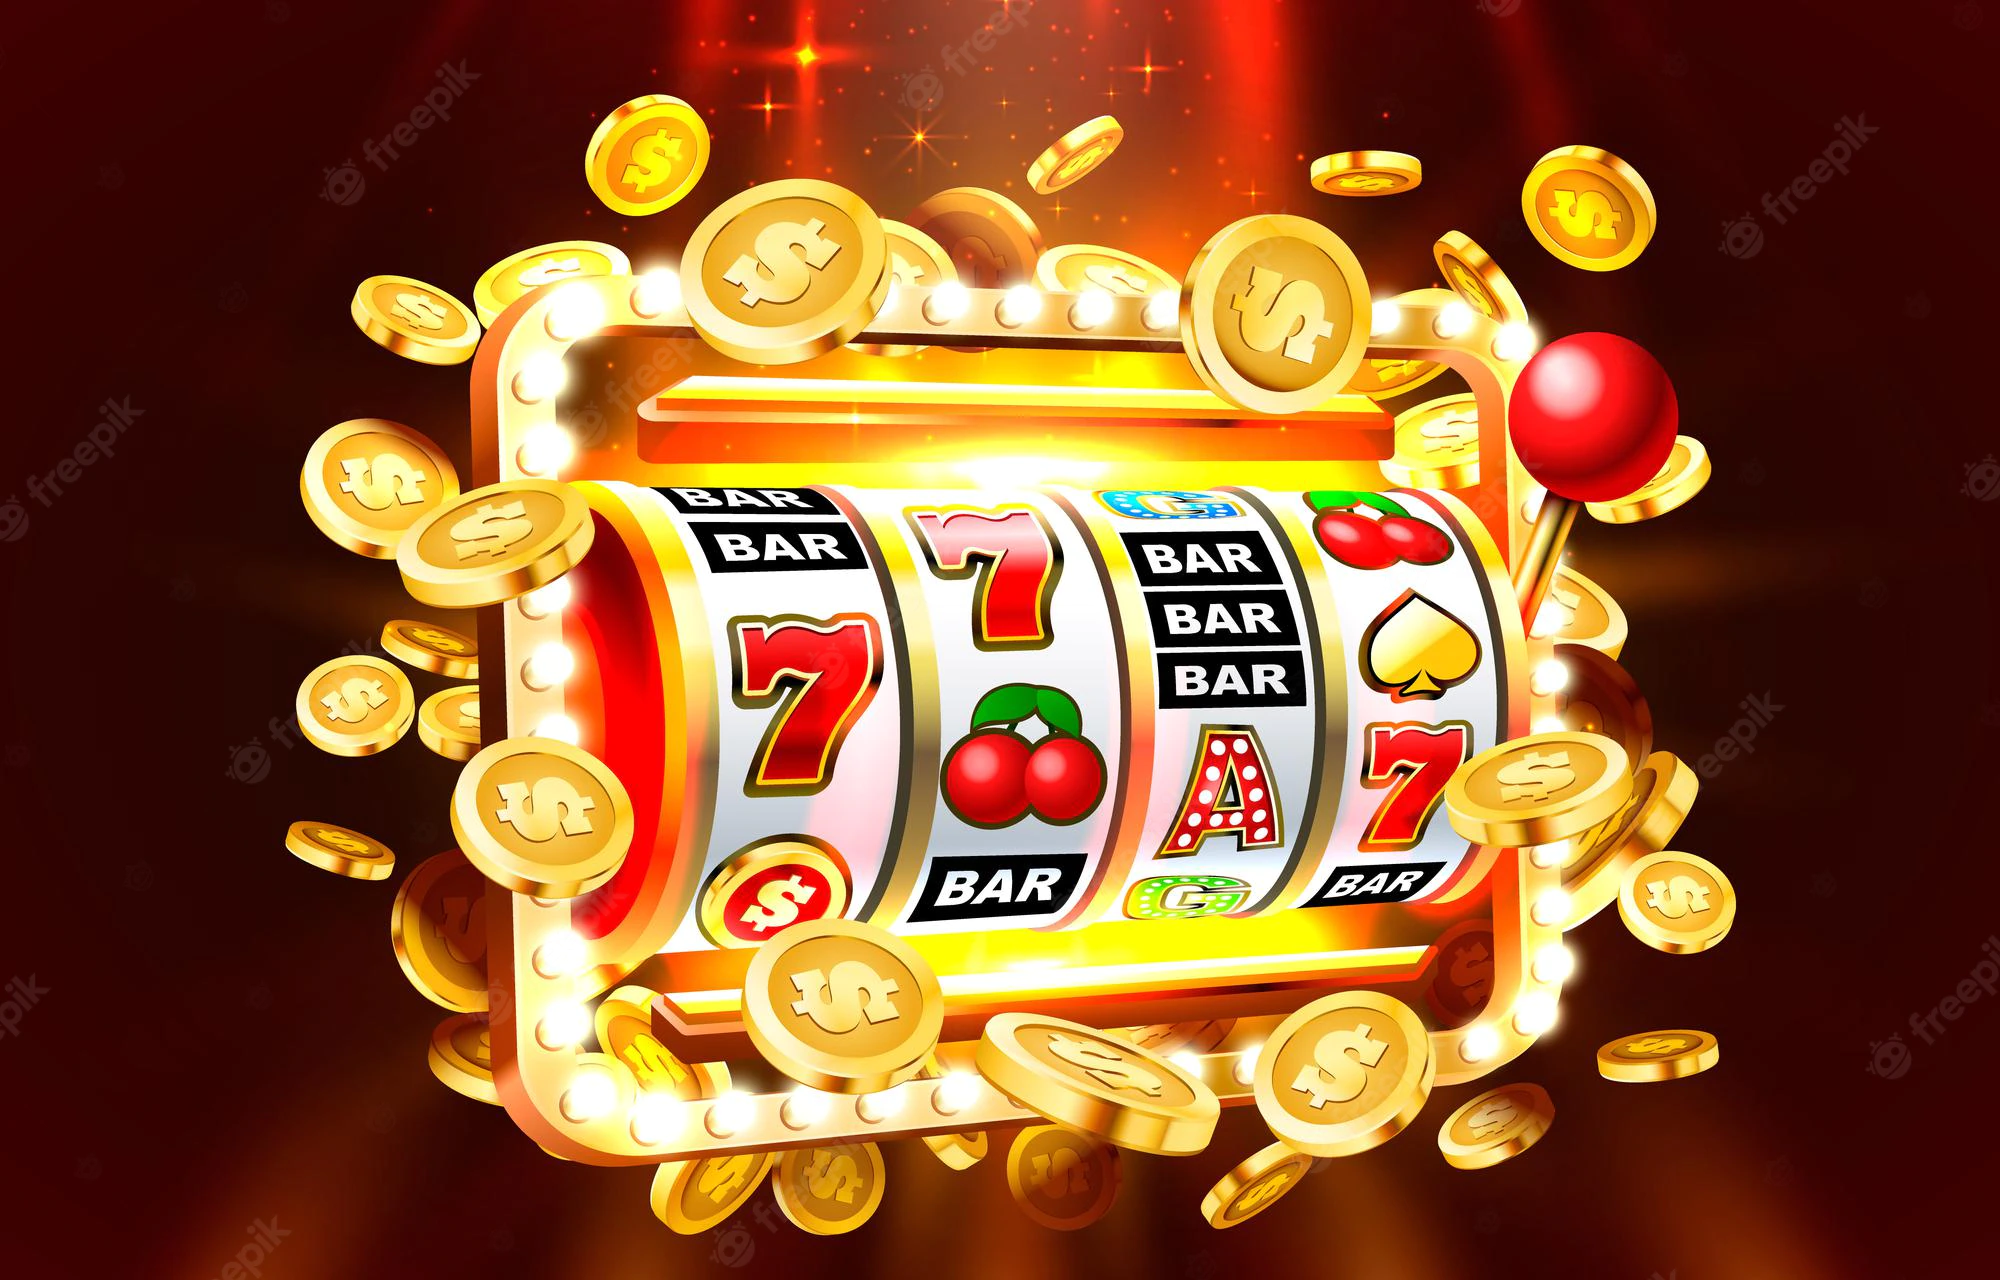 What are the different bonuses in Online Slot Games?